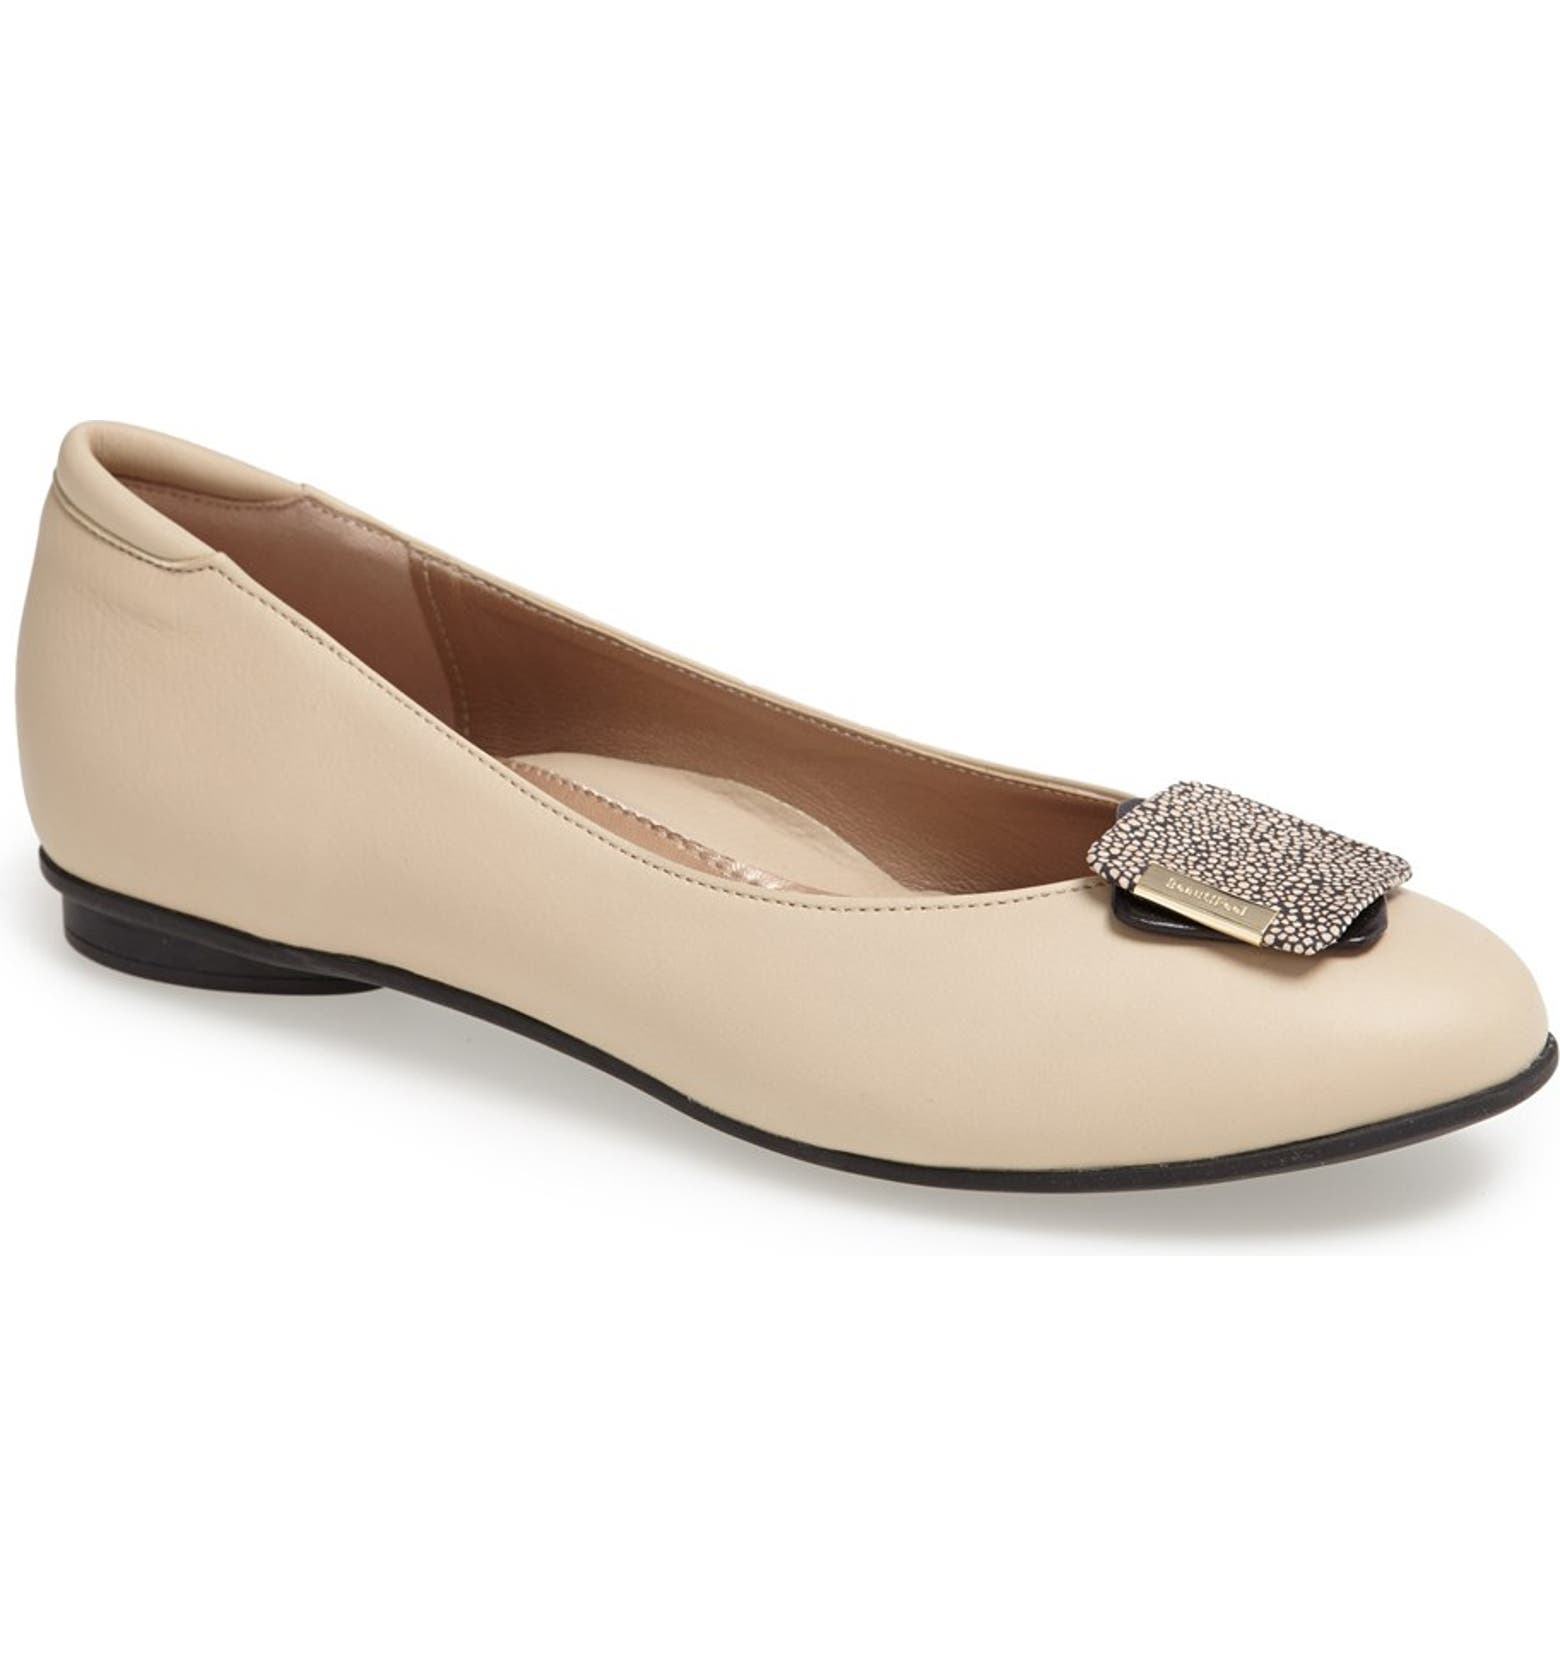 BeautiFeel 'Shelly' Leather Flat | Nordstrom